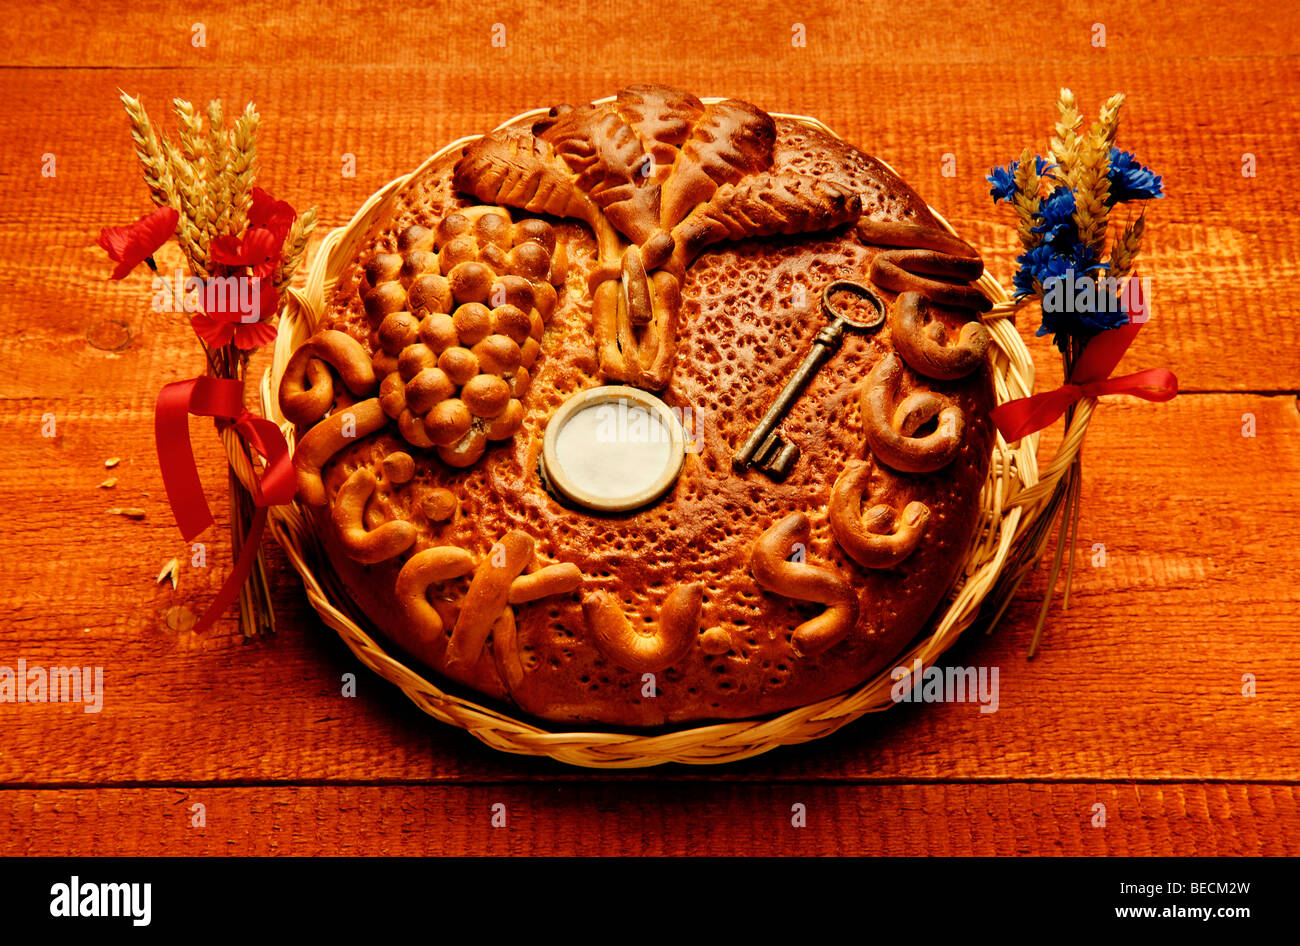 Decorated loaf of bread with baked-in key and salt cellar in a basket as a housewarming gift Stock Photo